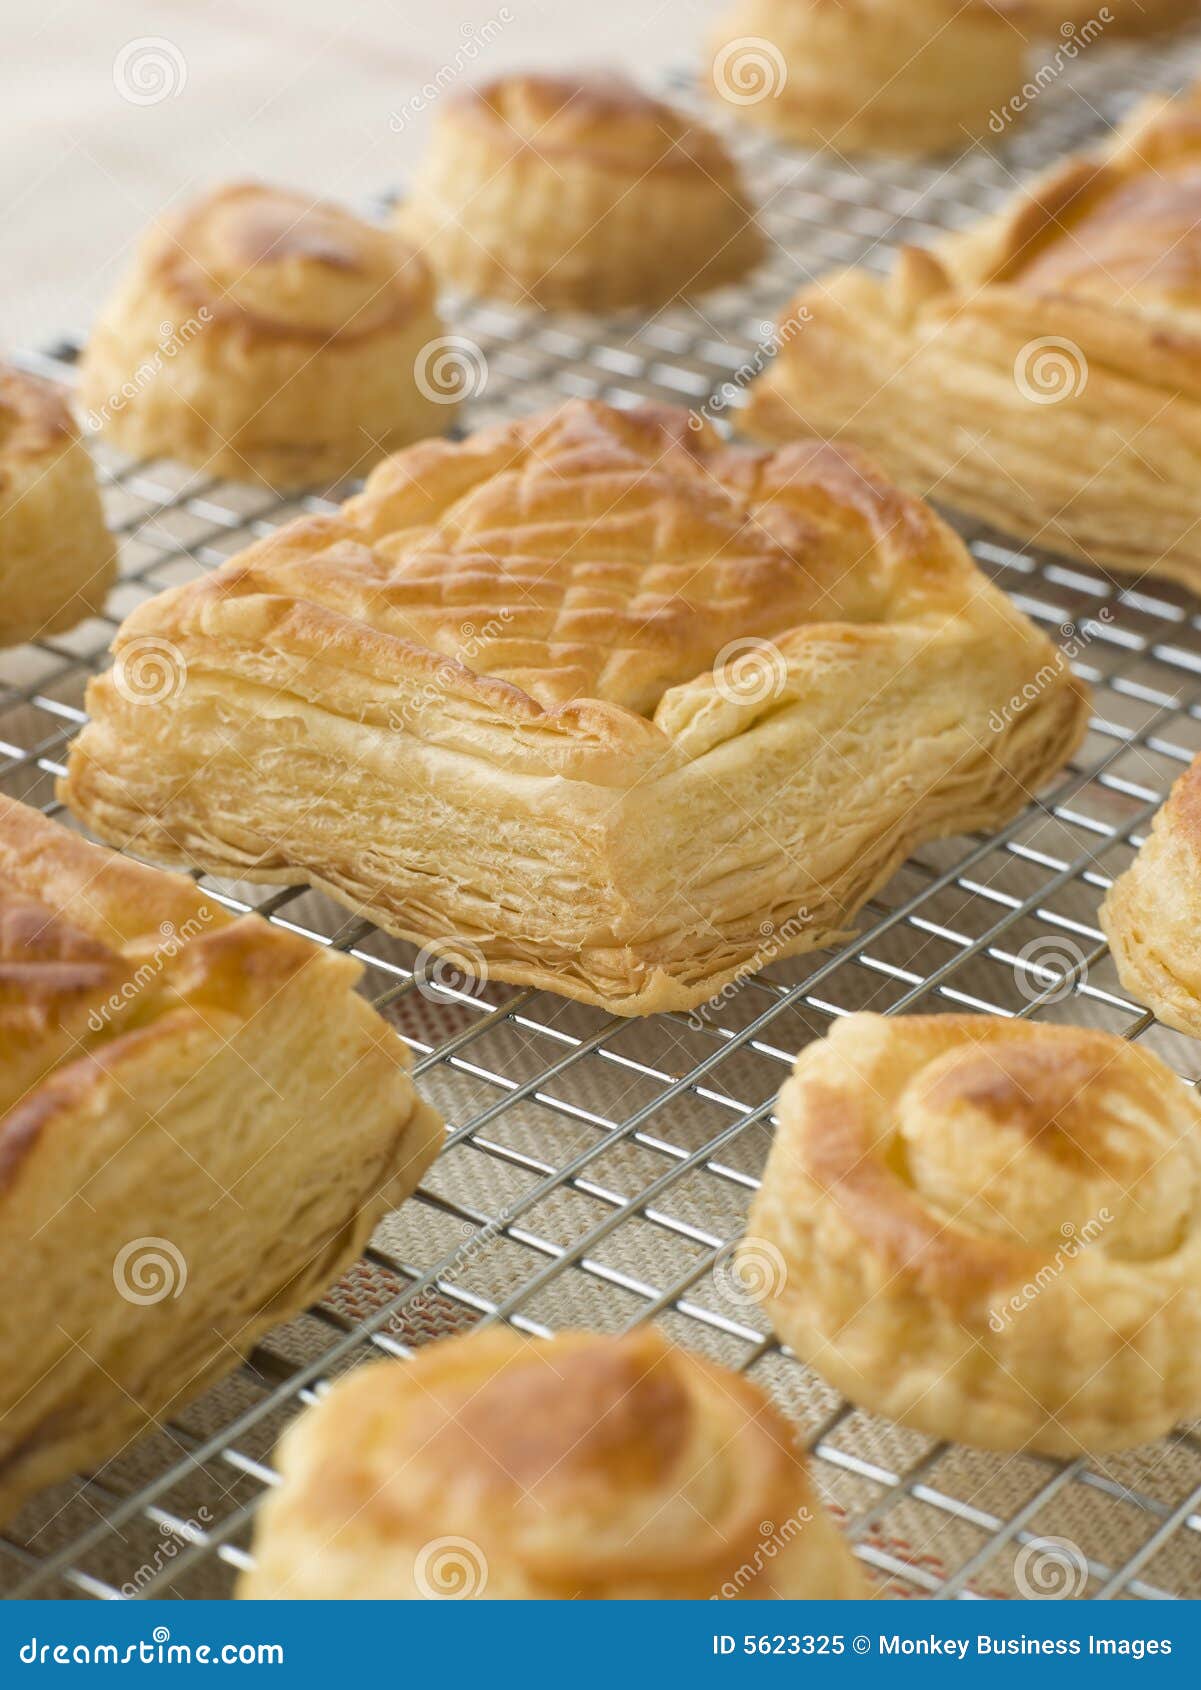 selection of vol au vents on a cooling rack